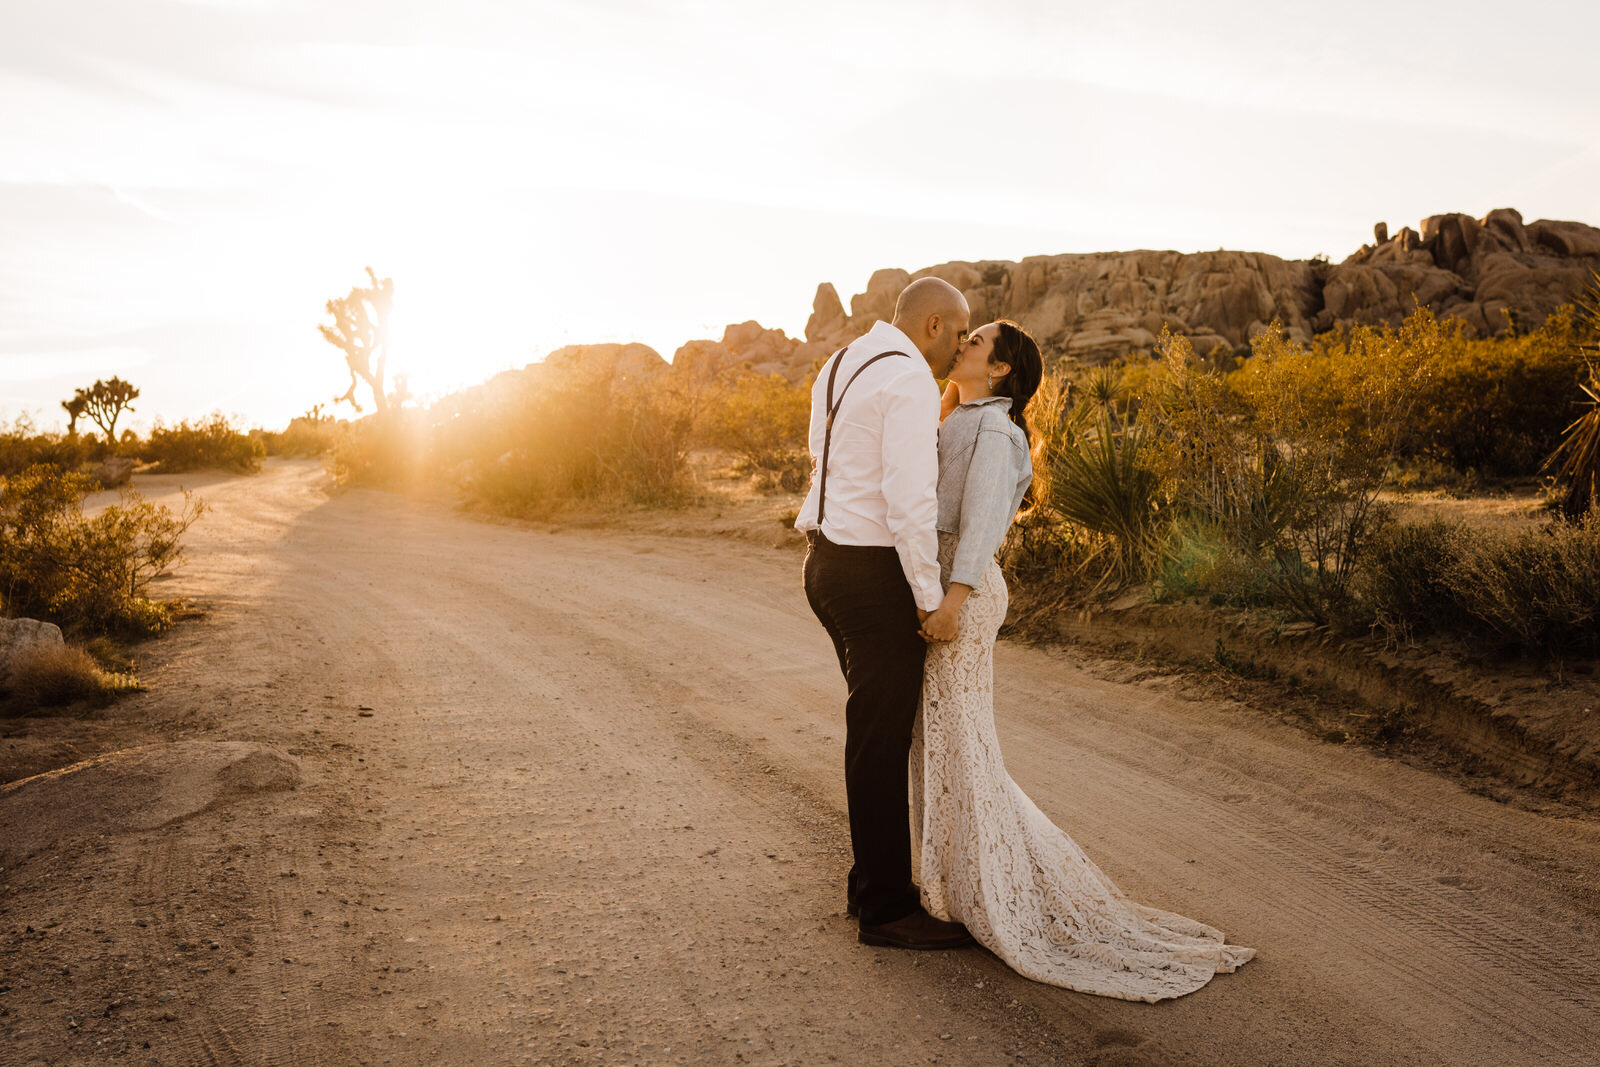 Eloping bride and groom kiss in Joshua Tree National Park at sunset | photo by Kept Record | www.keptrecord.com